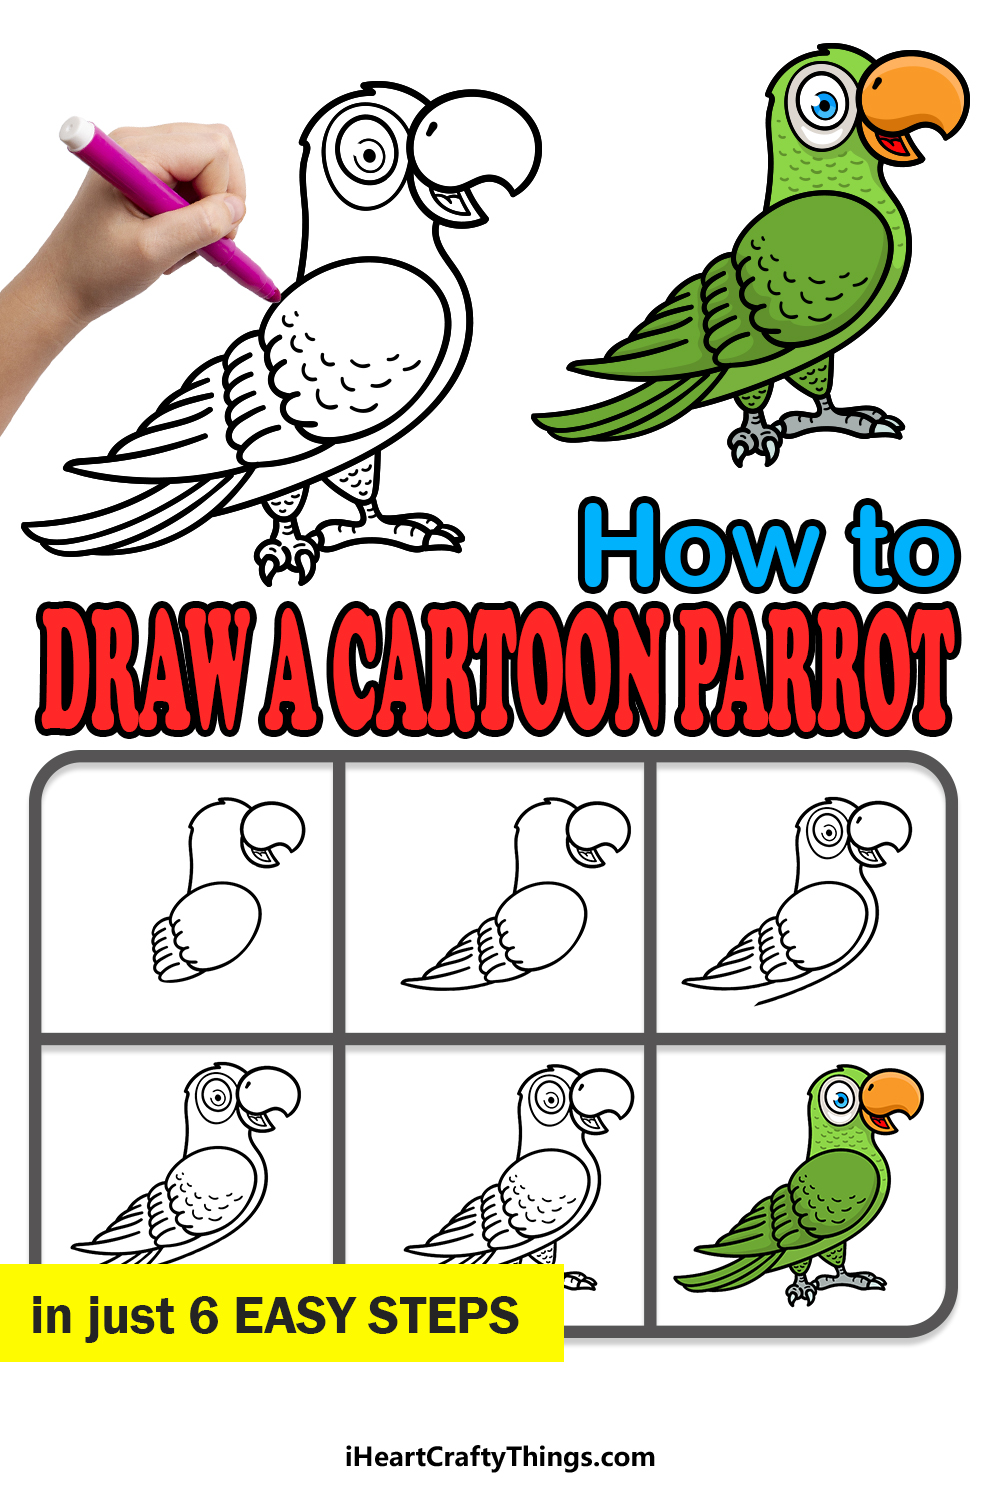 how to draw a cartoon parrot in 6 easy steps